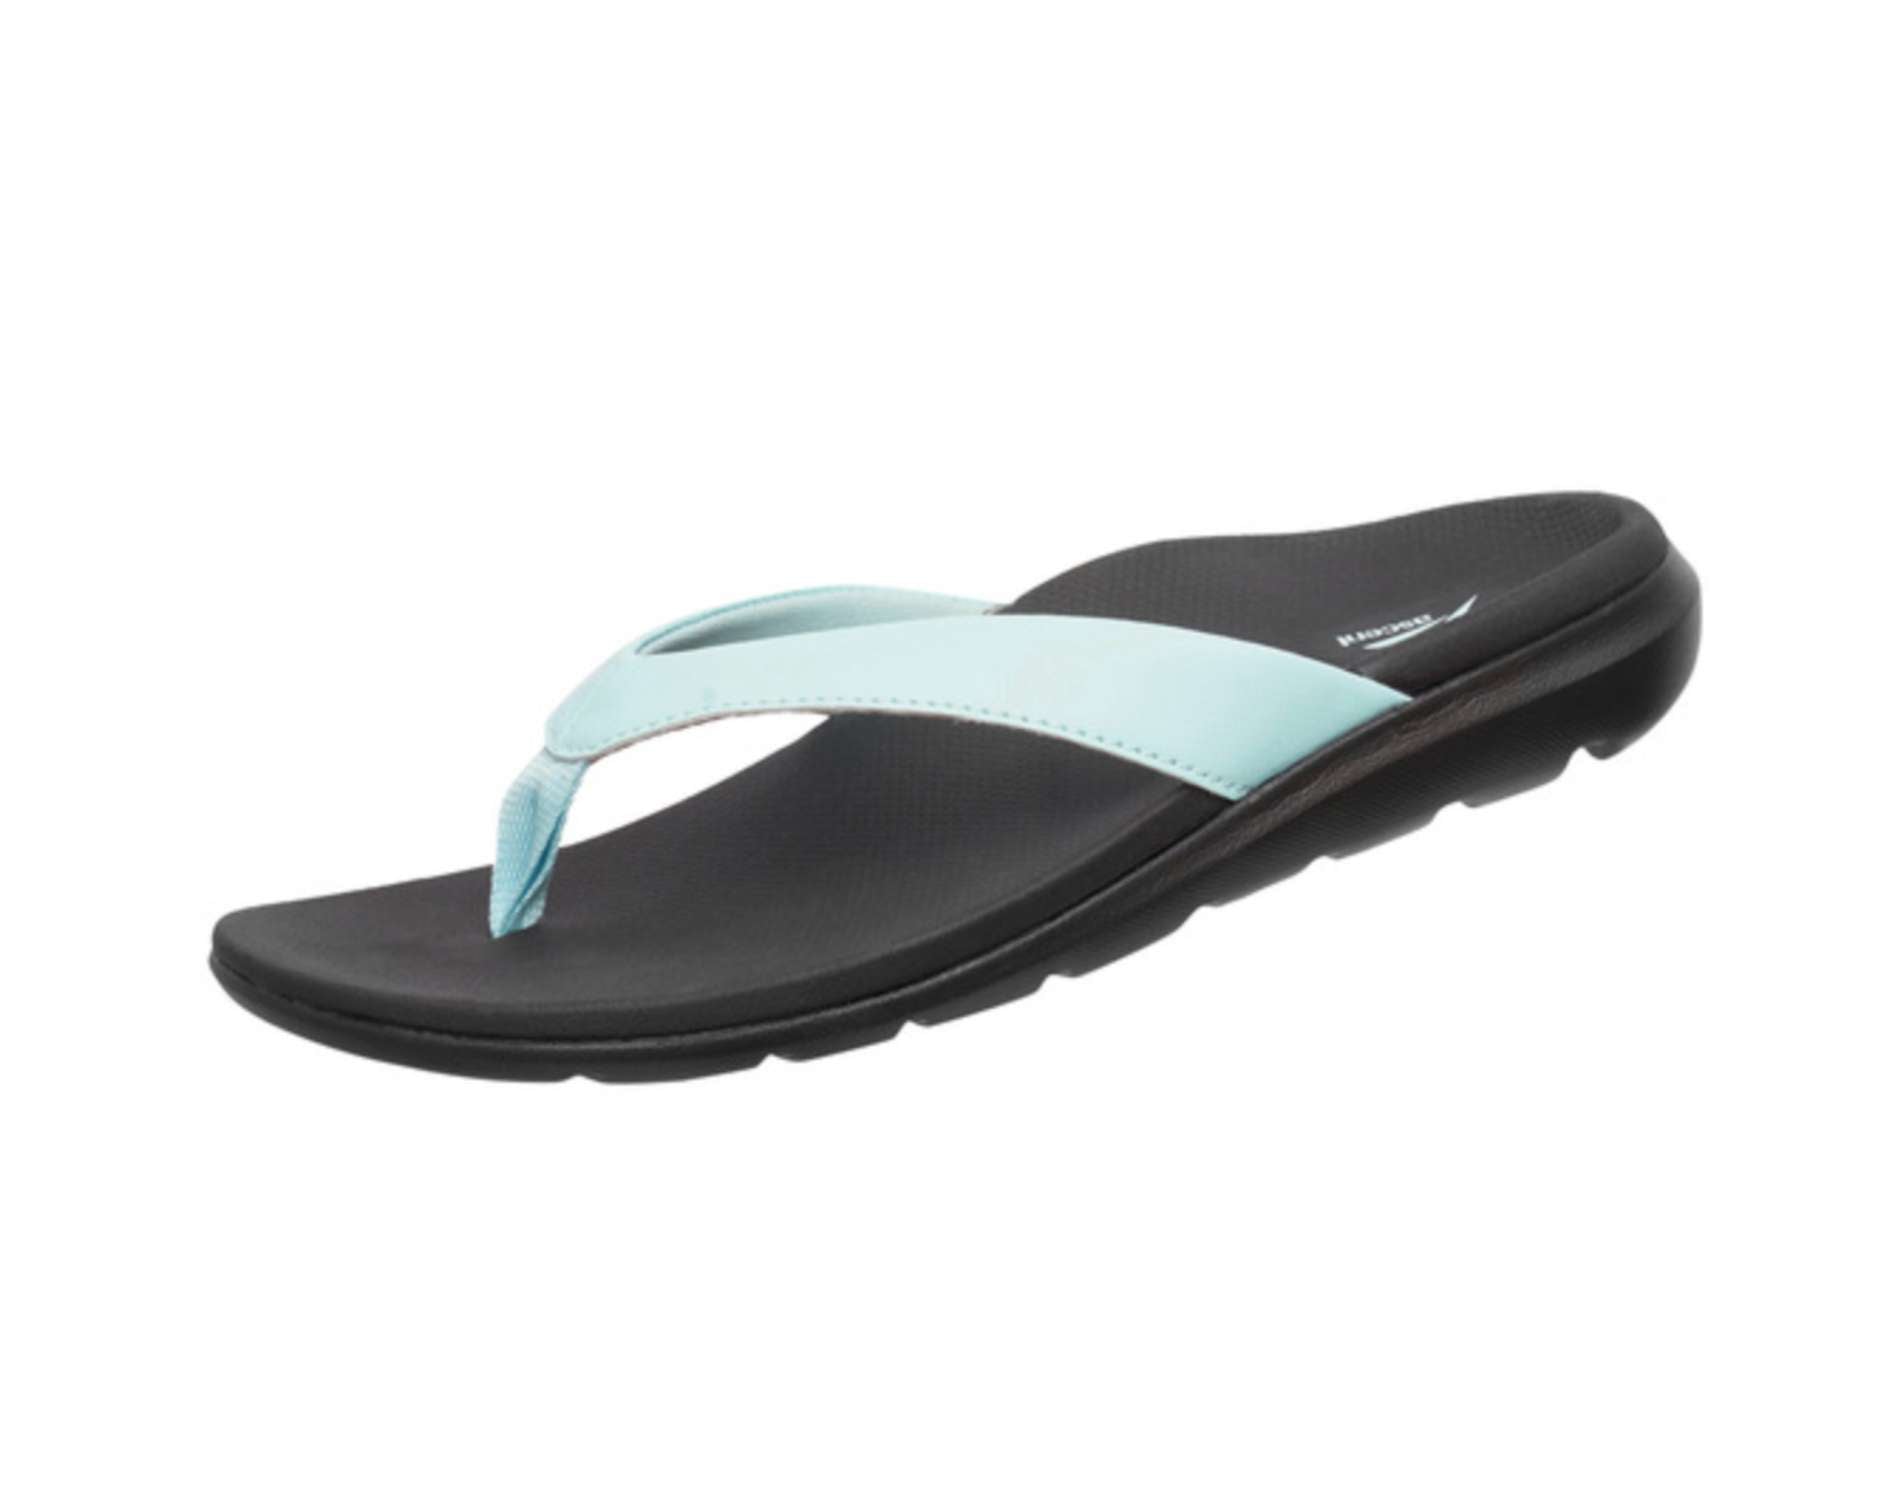 Ascent's Groove sandals for women in sky blue colour